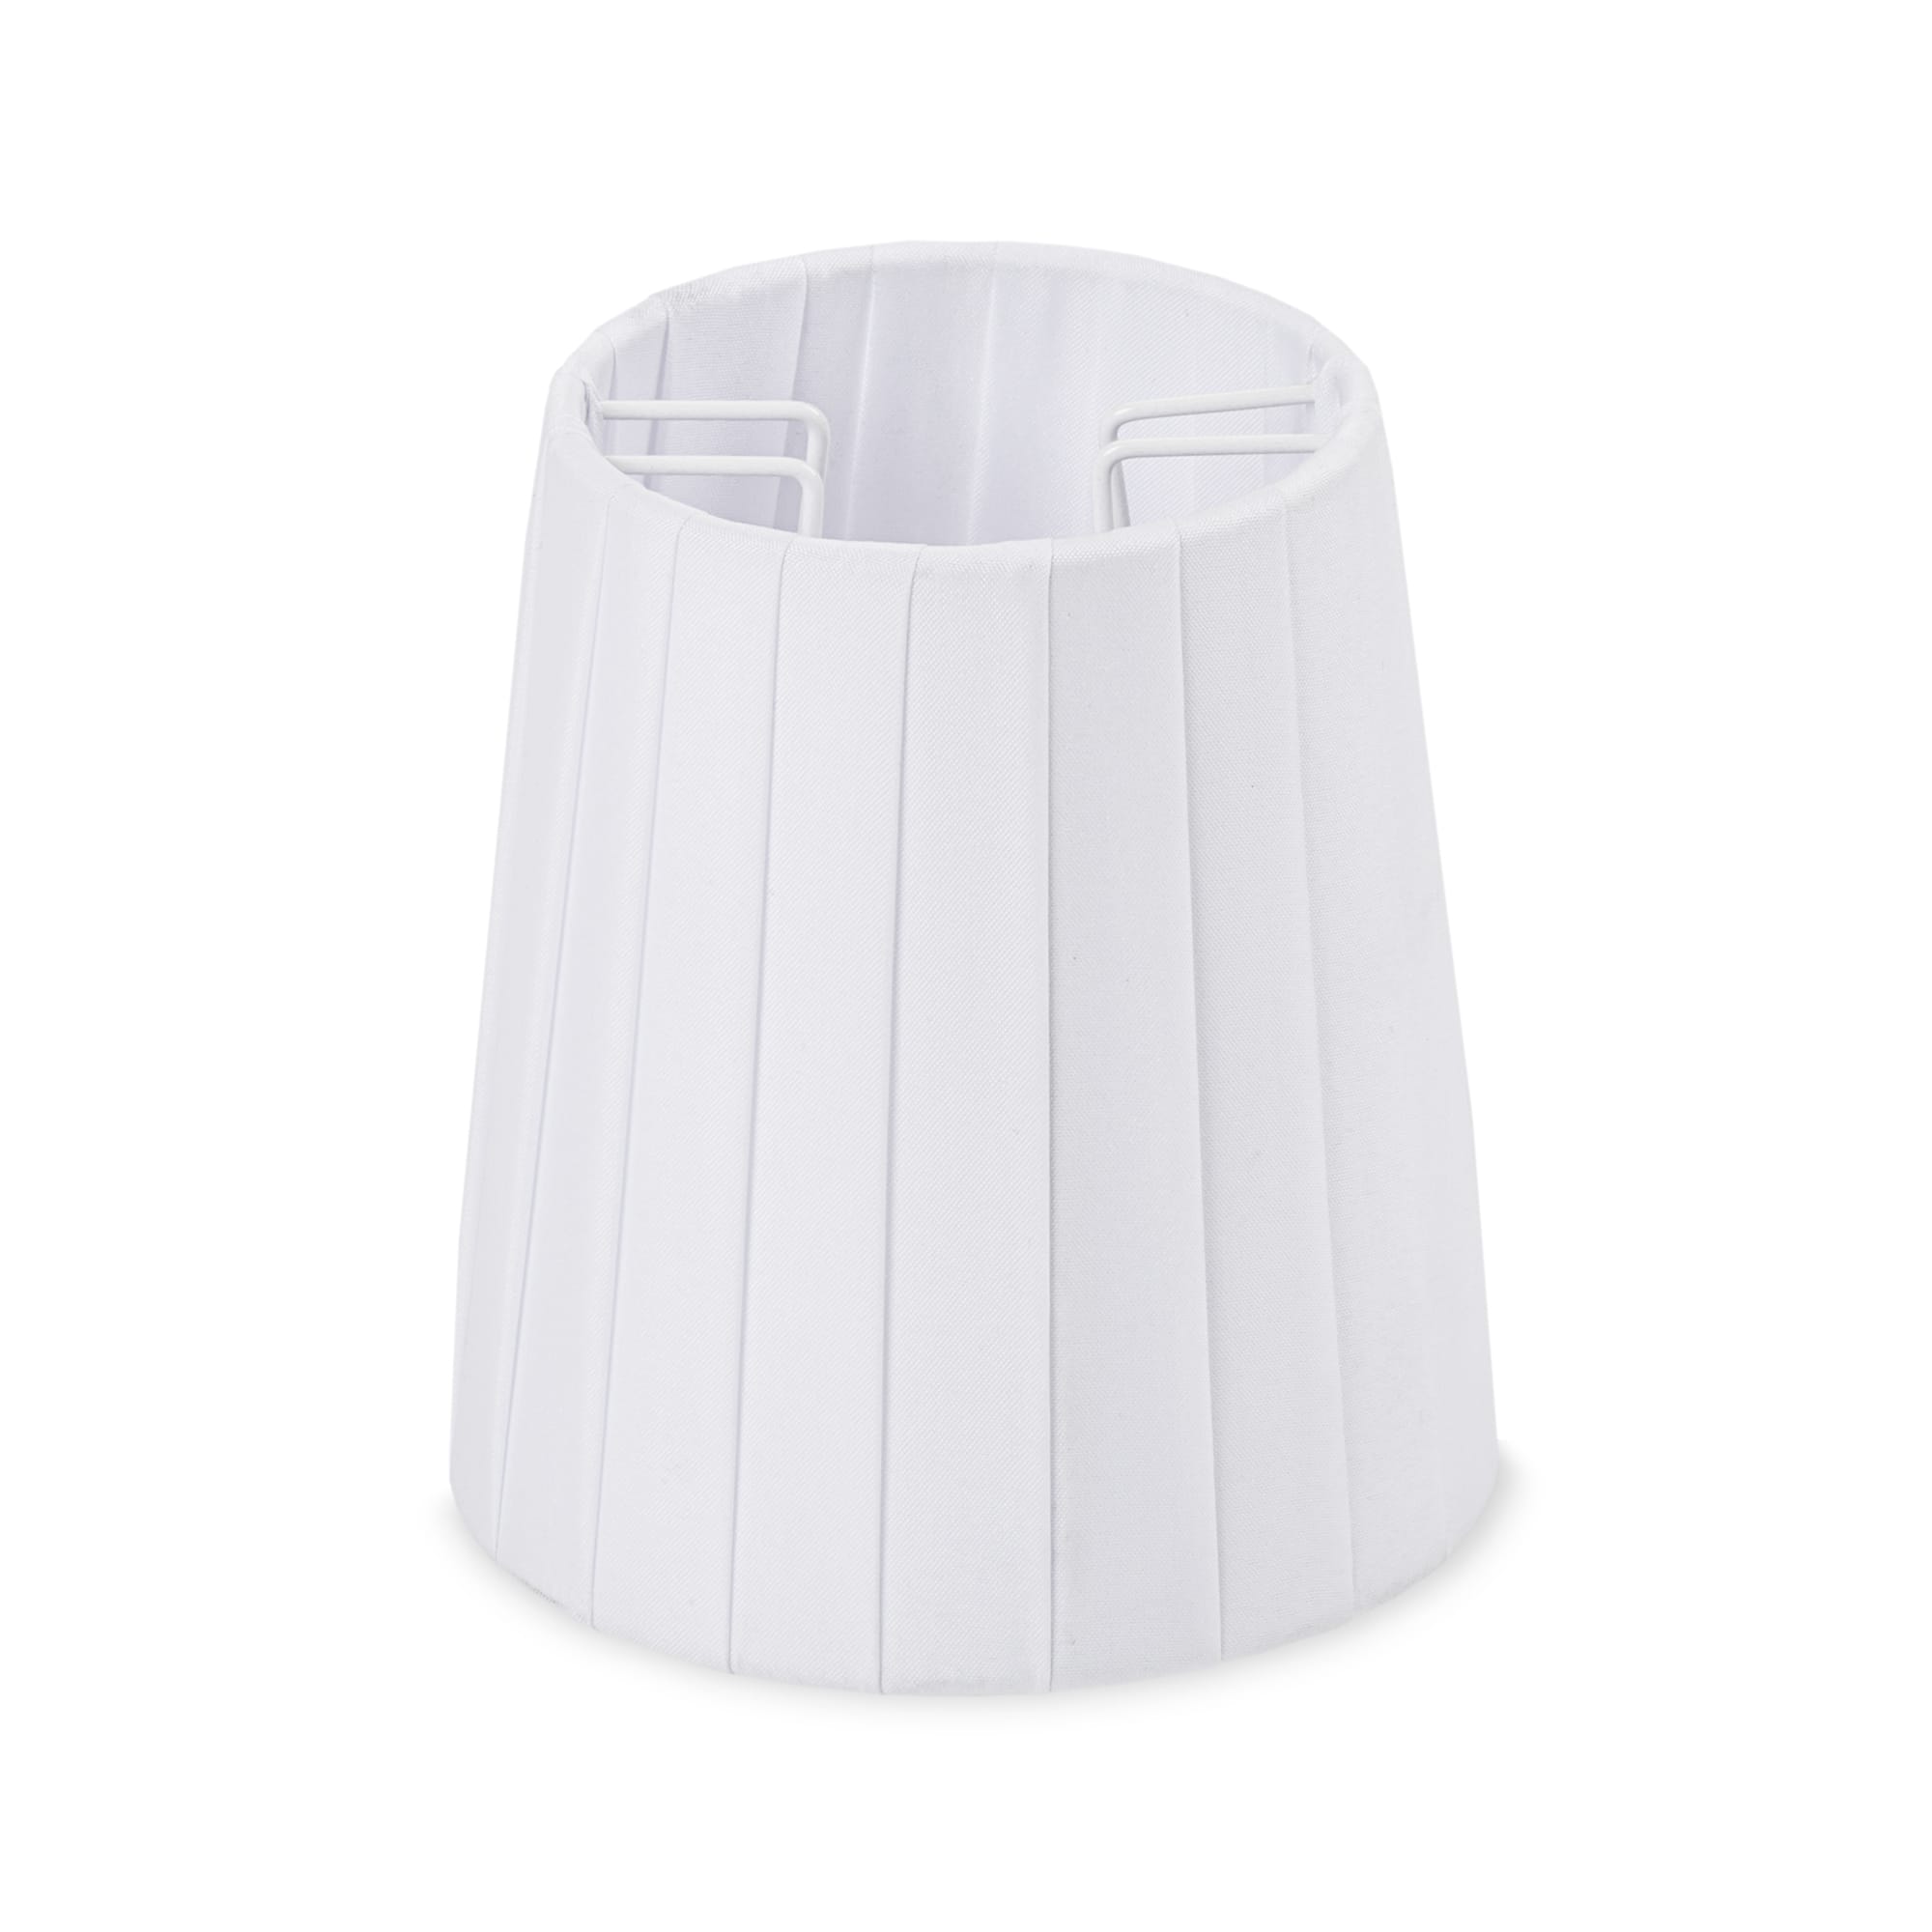 White Metal Polyester Lampshade for White Monkey Lamp